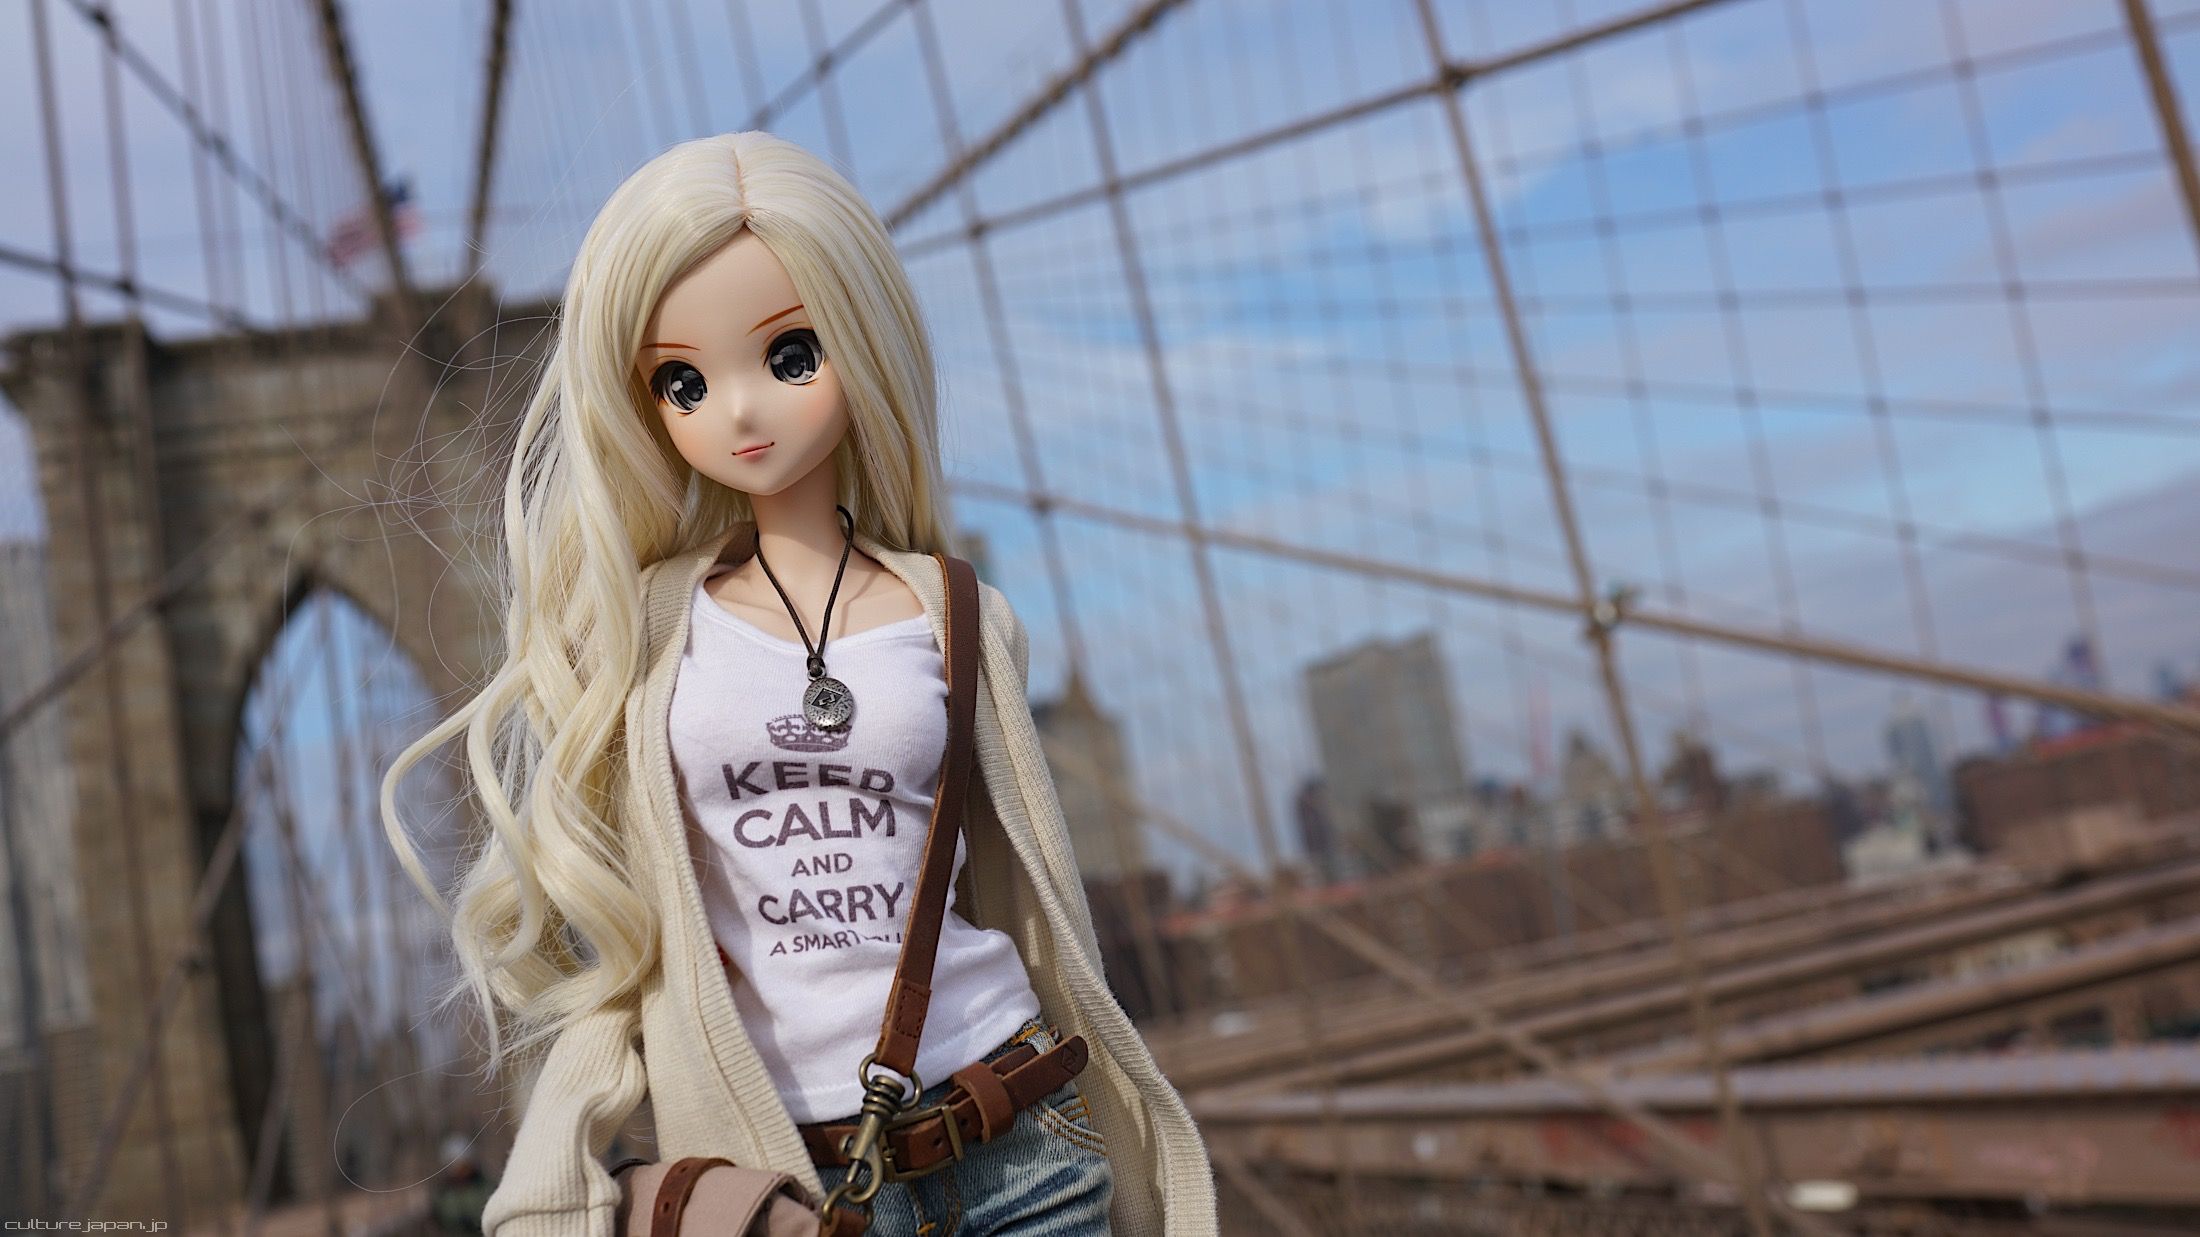 Our first Smart Doll unboxing 